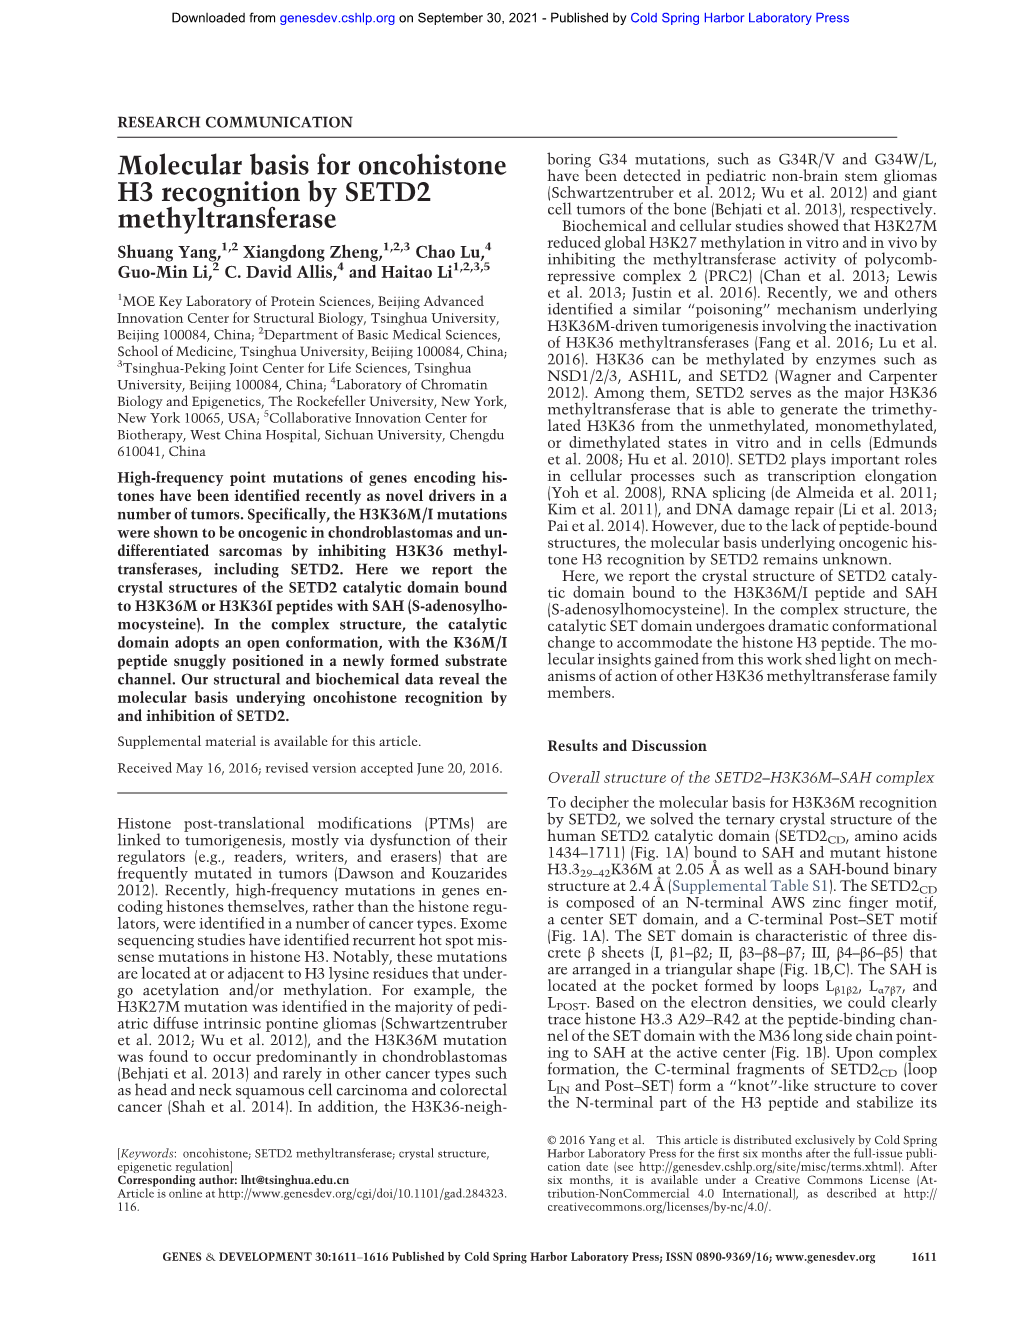 Molecular Basis for Oncohistone H3 Recognition by SETD2 Methyltransferase